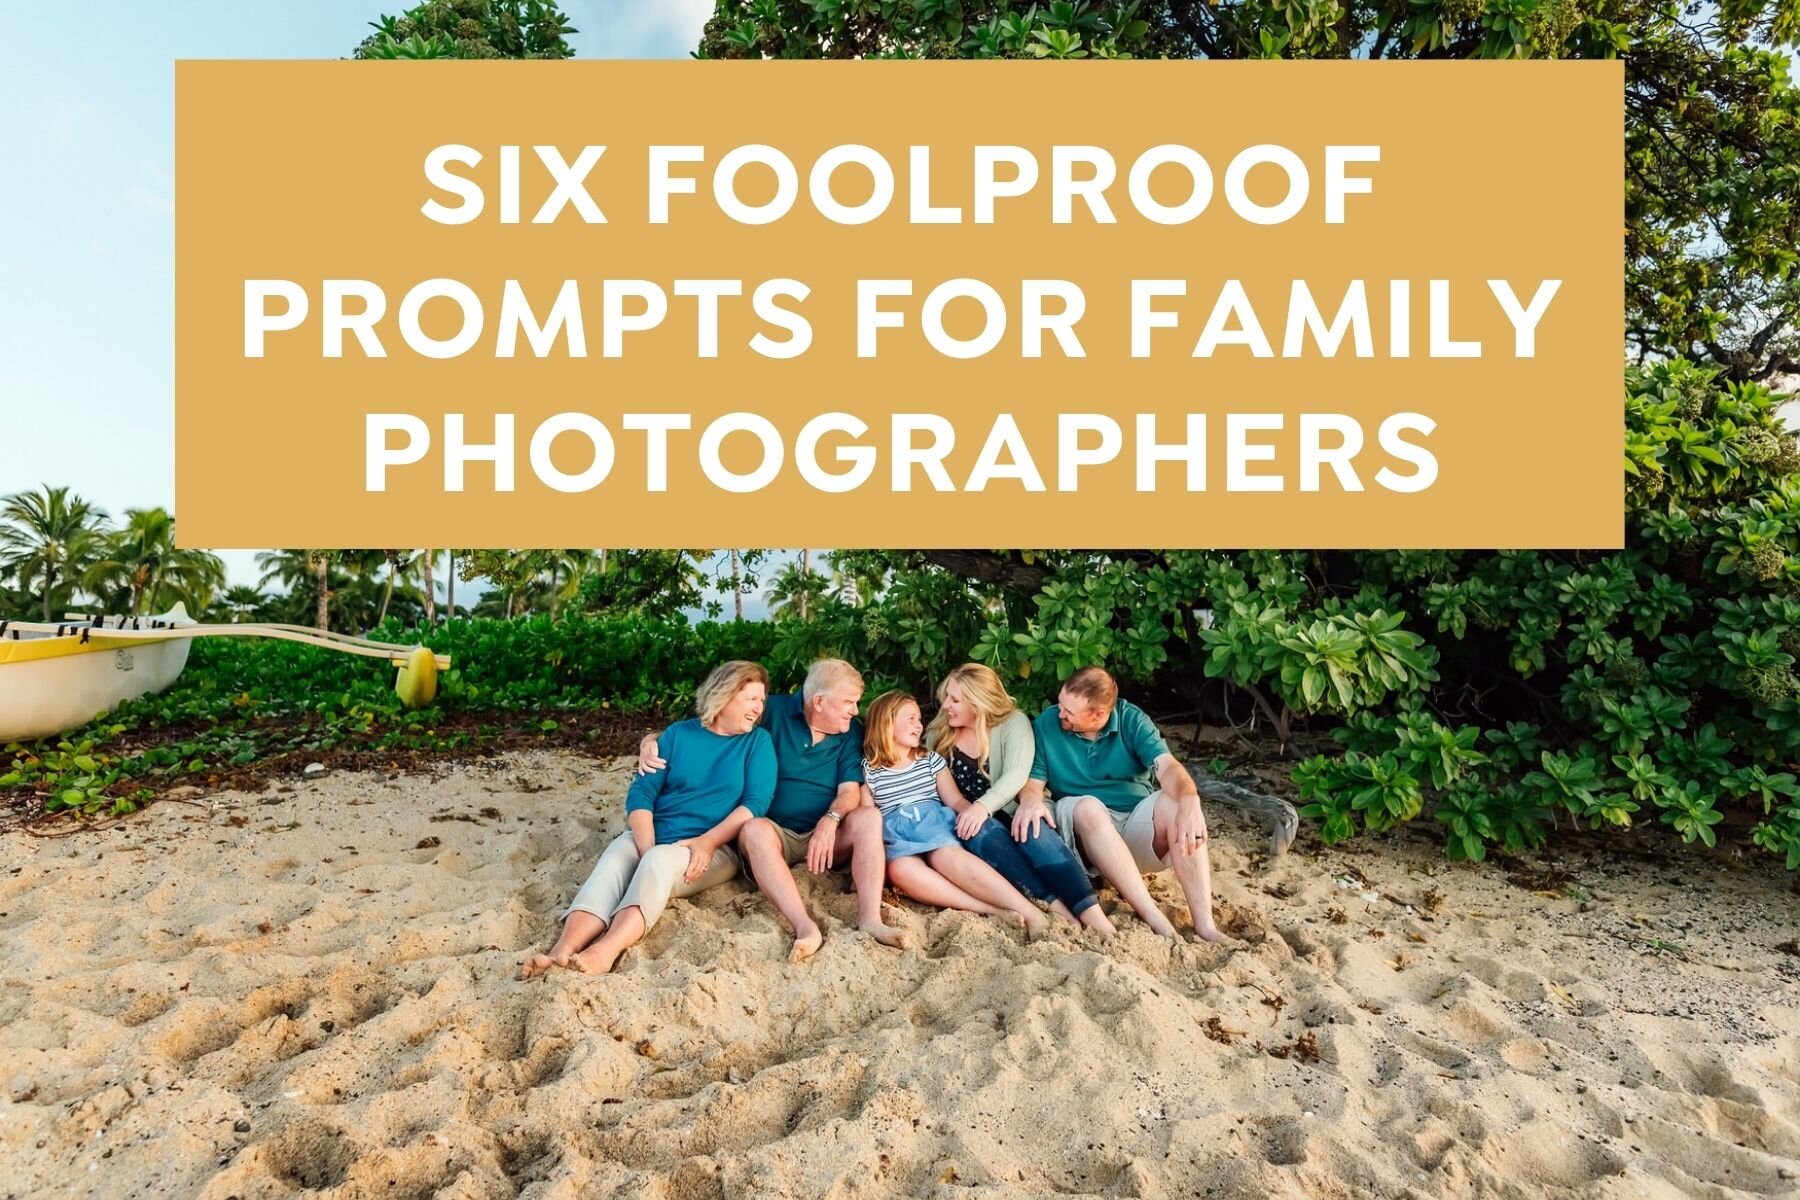 Six foolproof prompts for family photographers